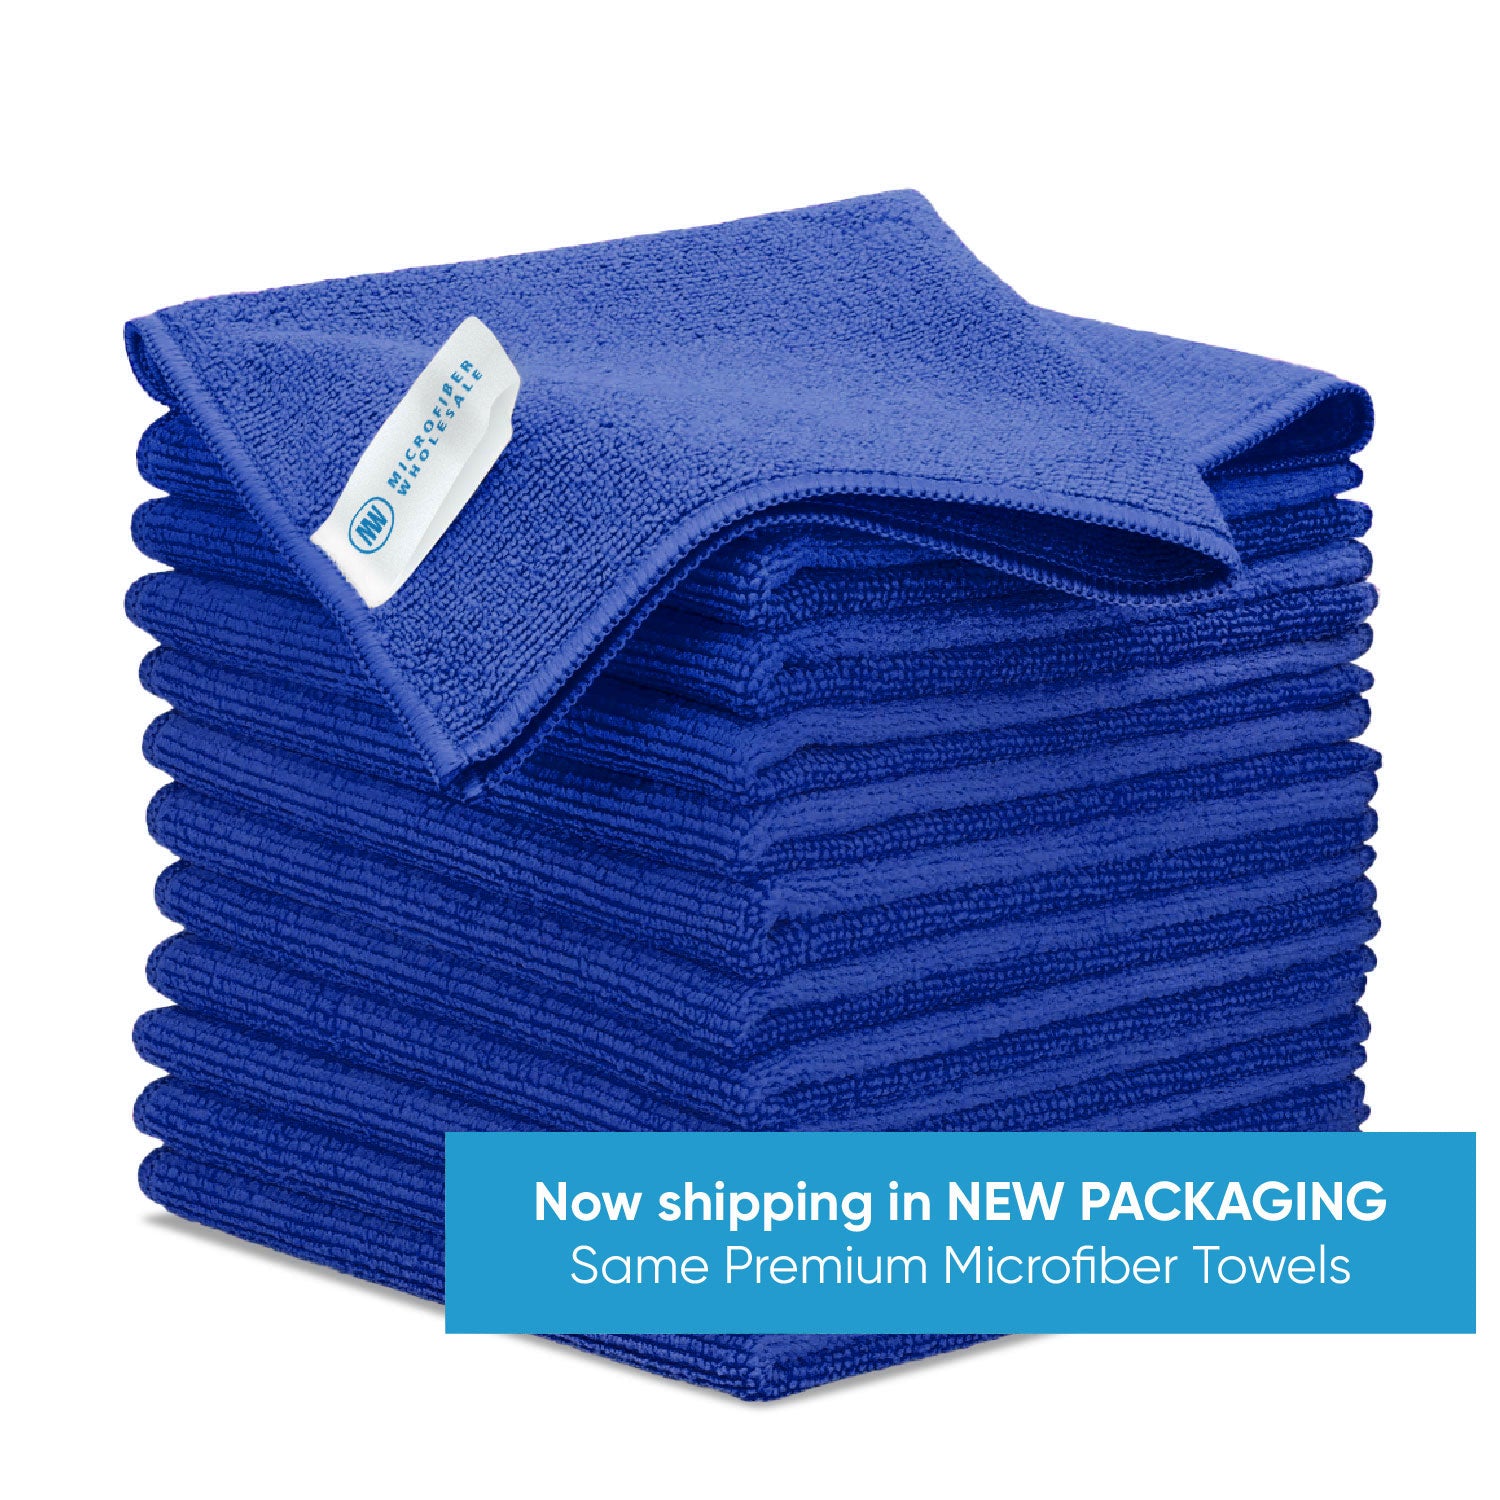 4 Pack of Flat Out Microfiber Wash Pads - 9 x 8